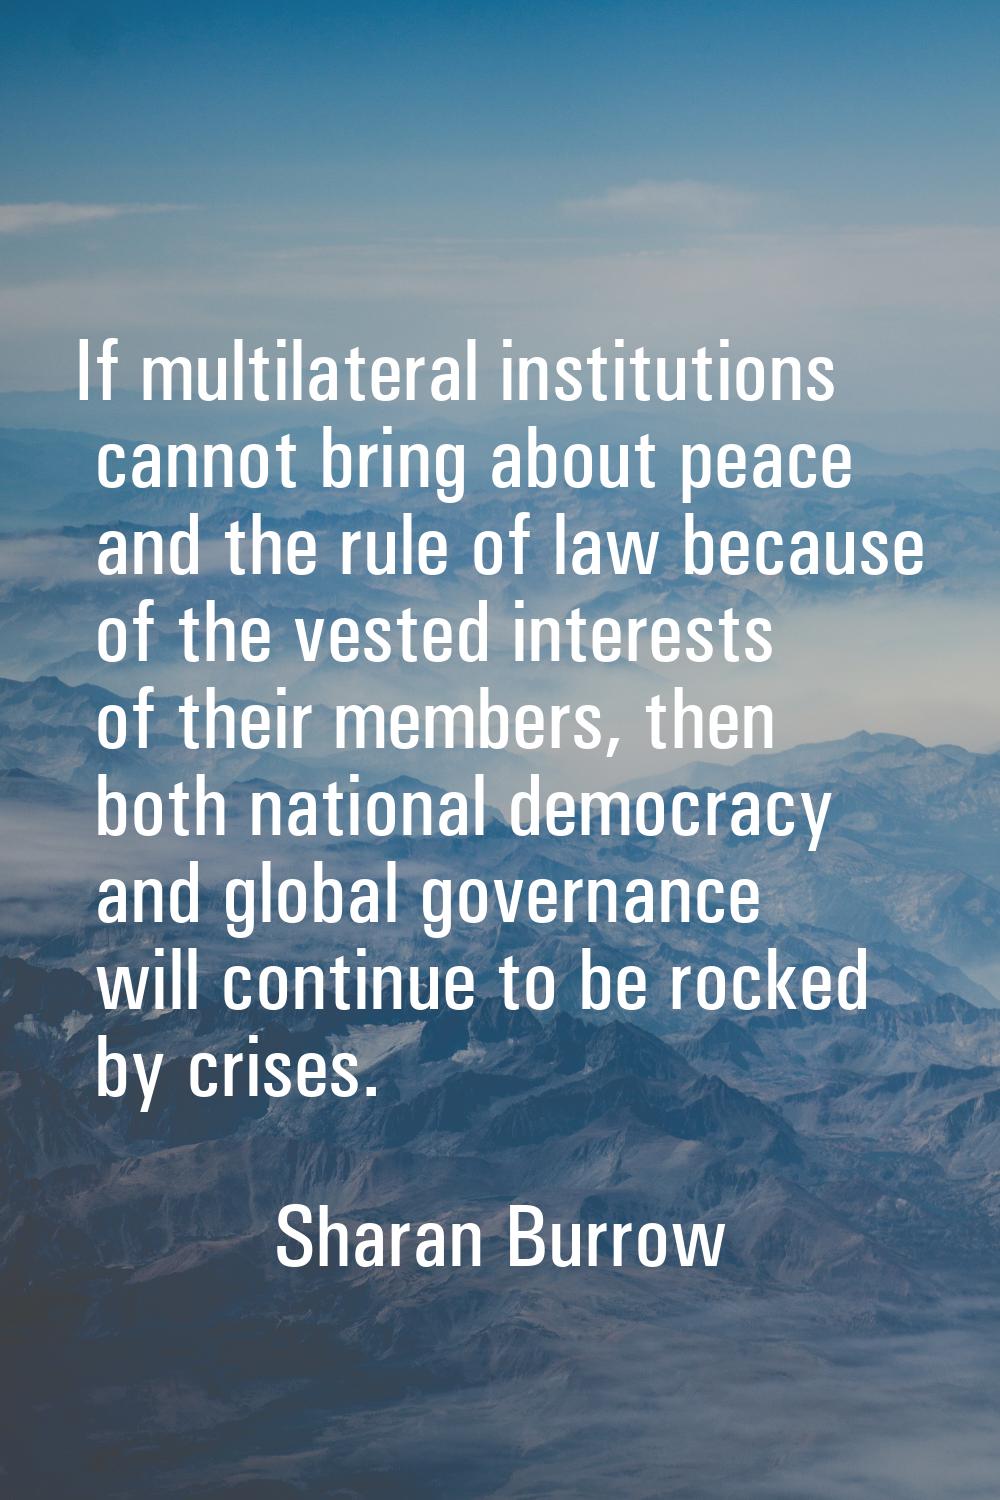 If multilateral institutions cannot bring about peace and the rule of law because of the vested int